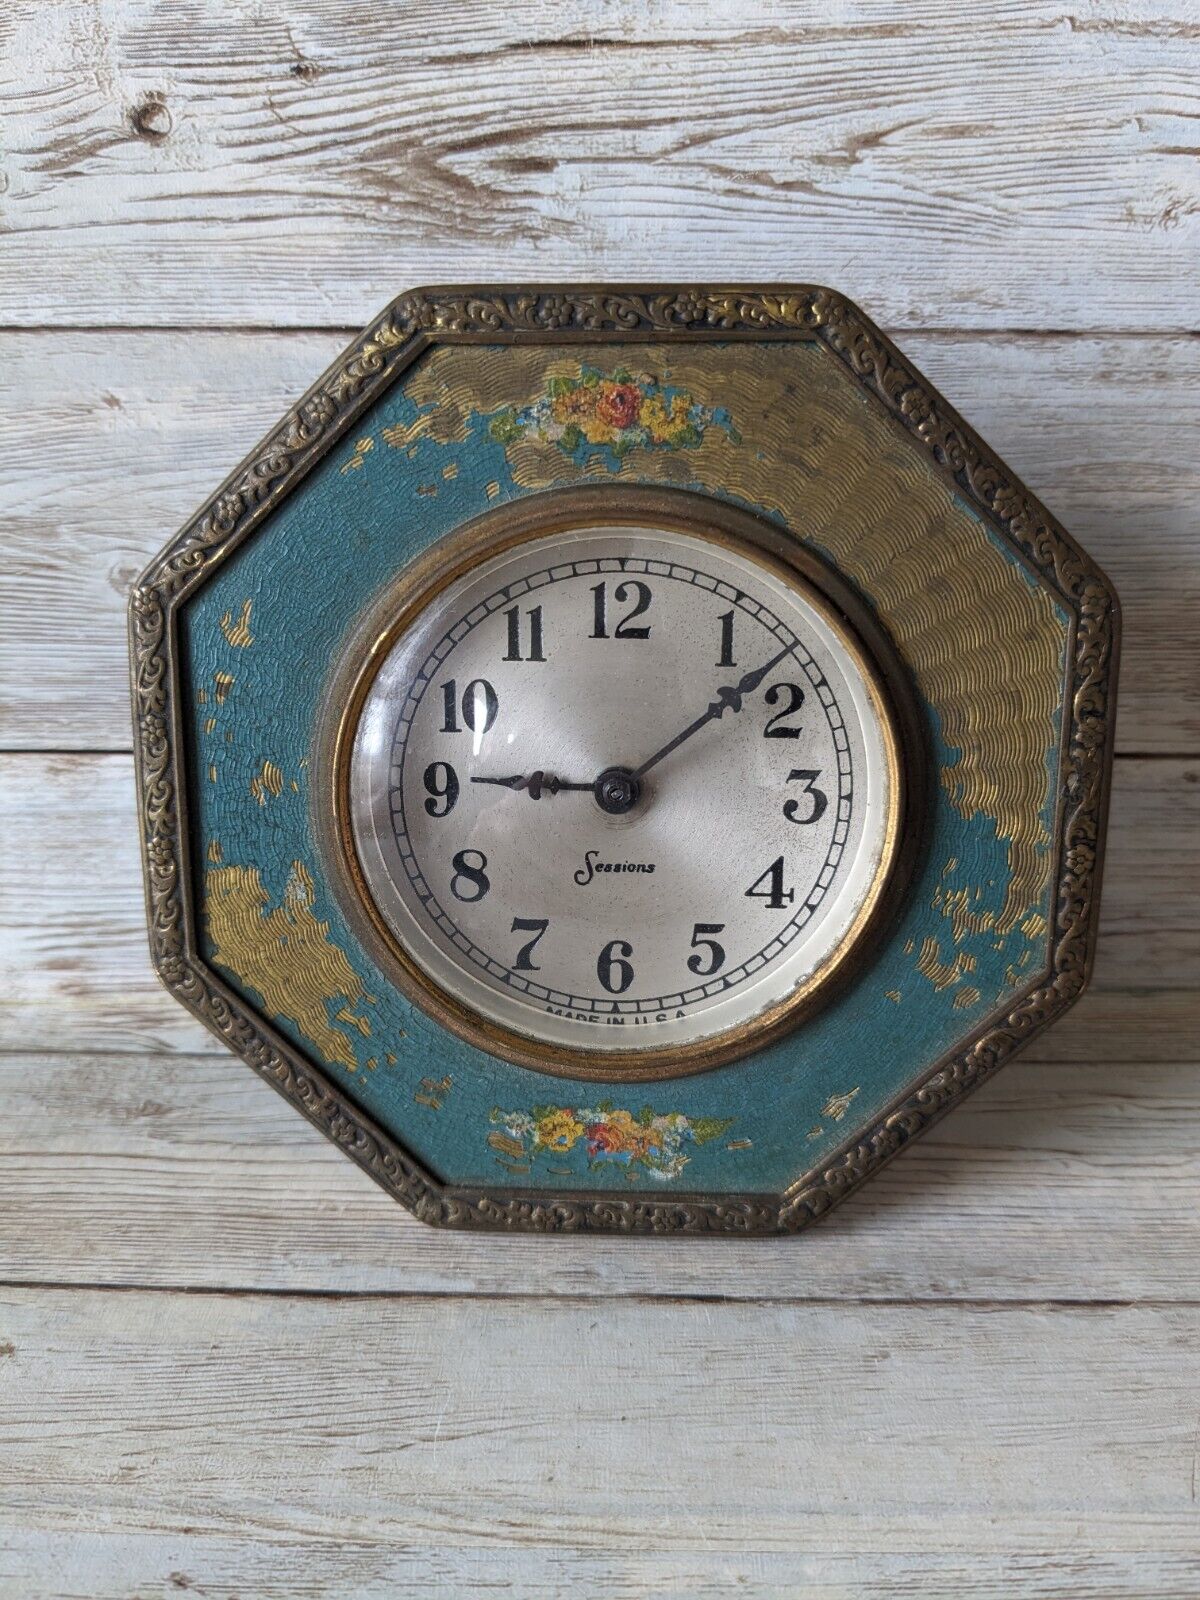 Antique Sessions Wind Up Clock Guilloche Surround Flowers For Parts